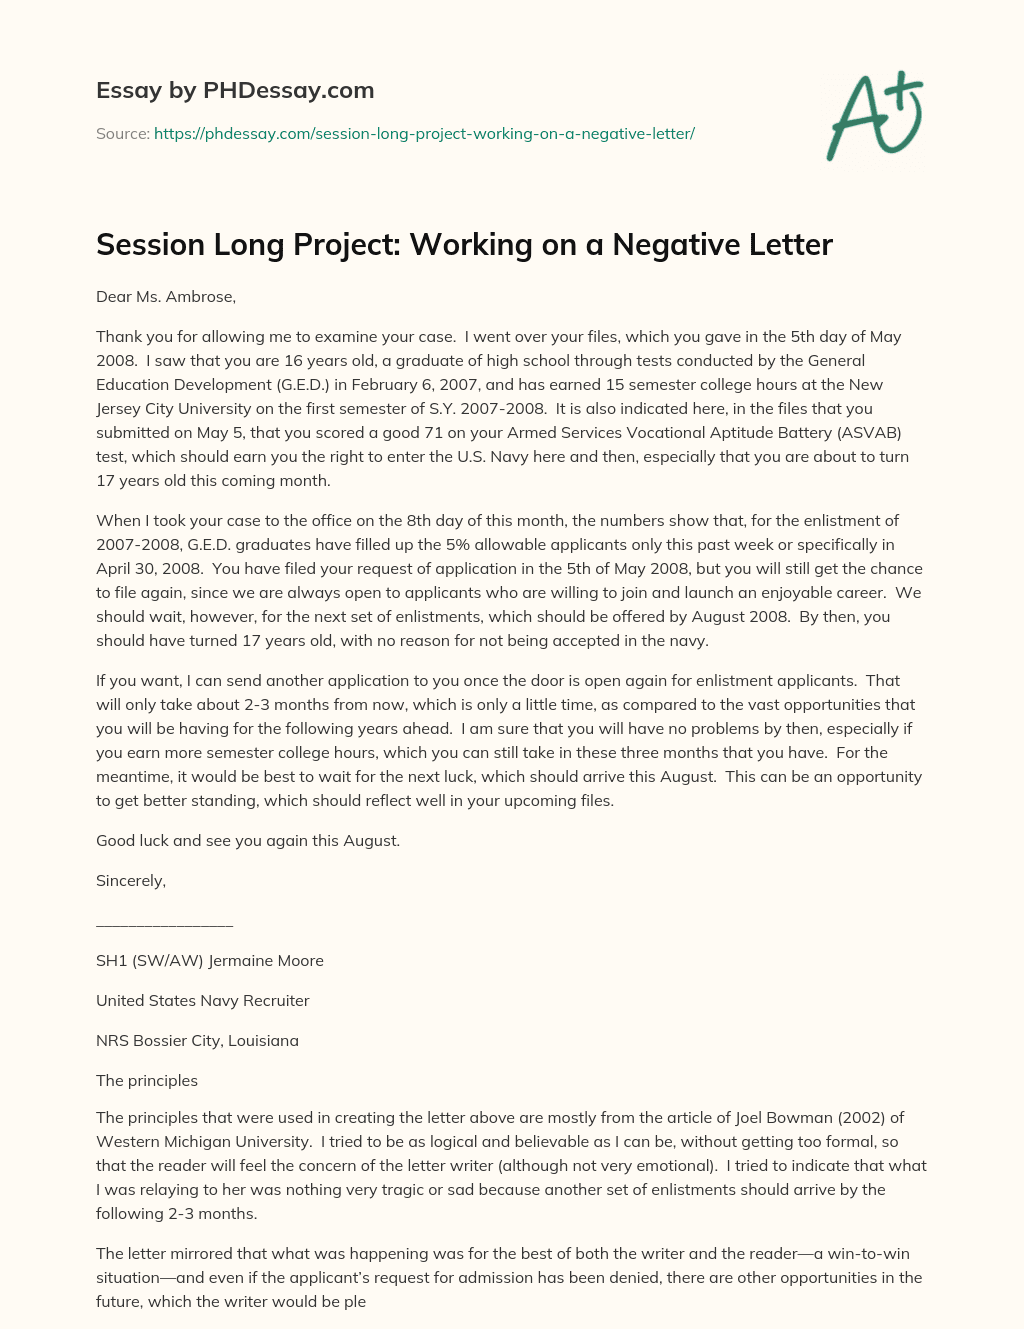 Session Long Project: Working on a Negative Letter essay